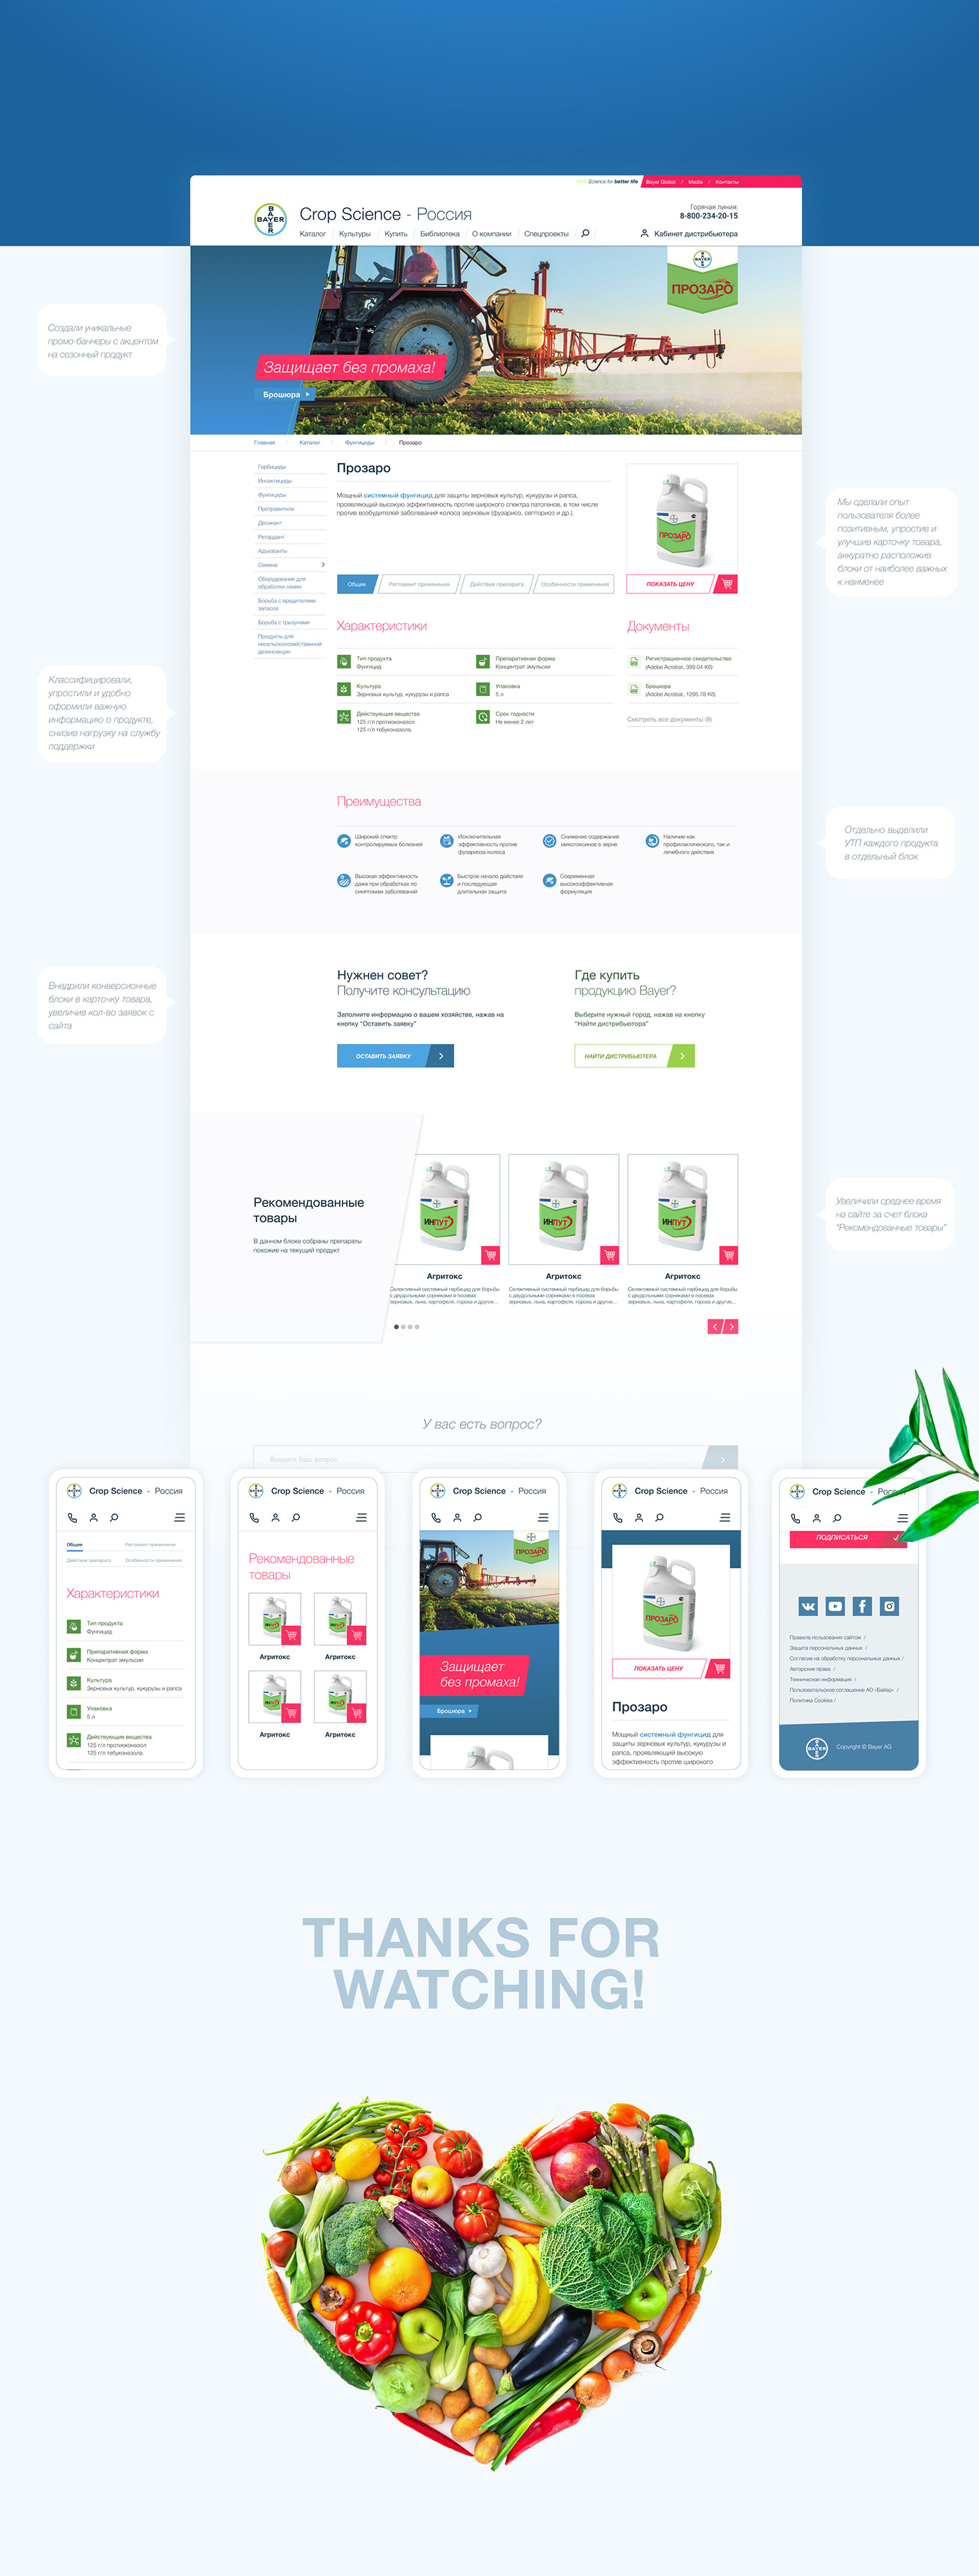 Agro Bayer crop field Nature redesign Russia science UI ux/ui